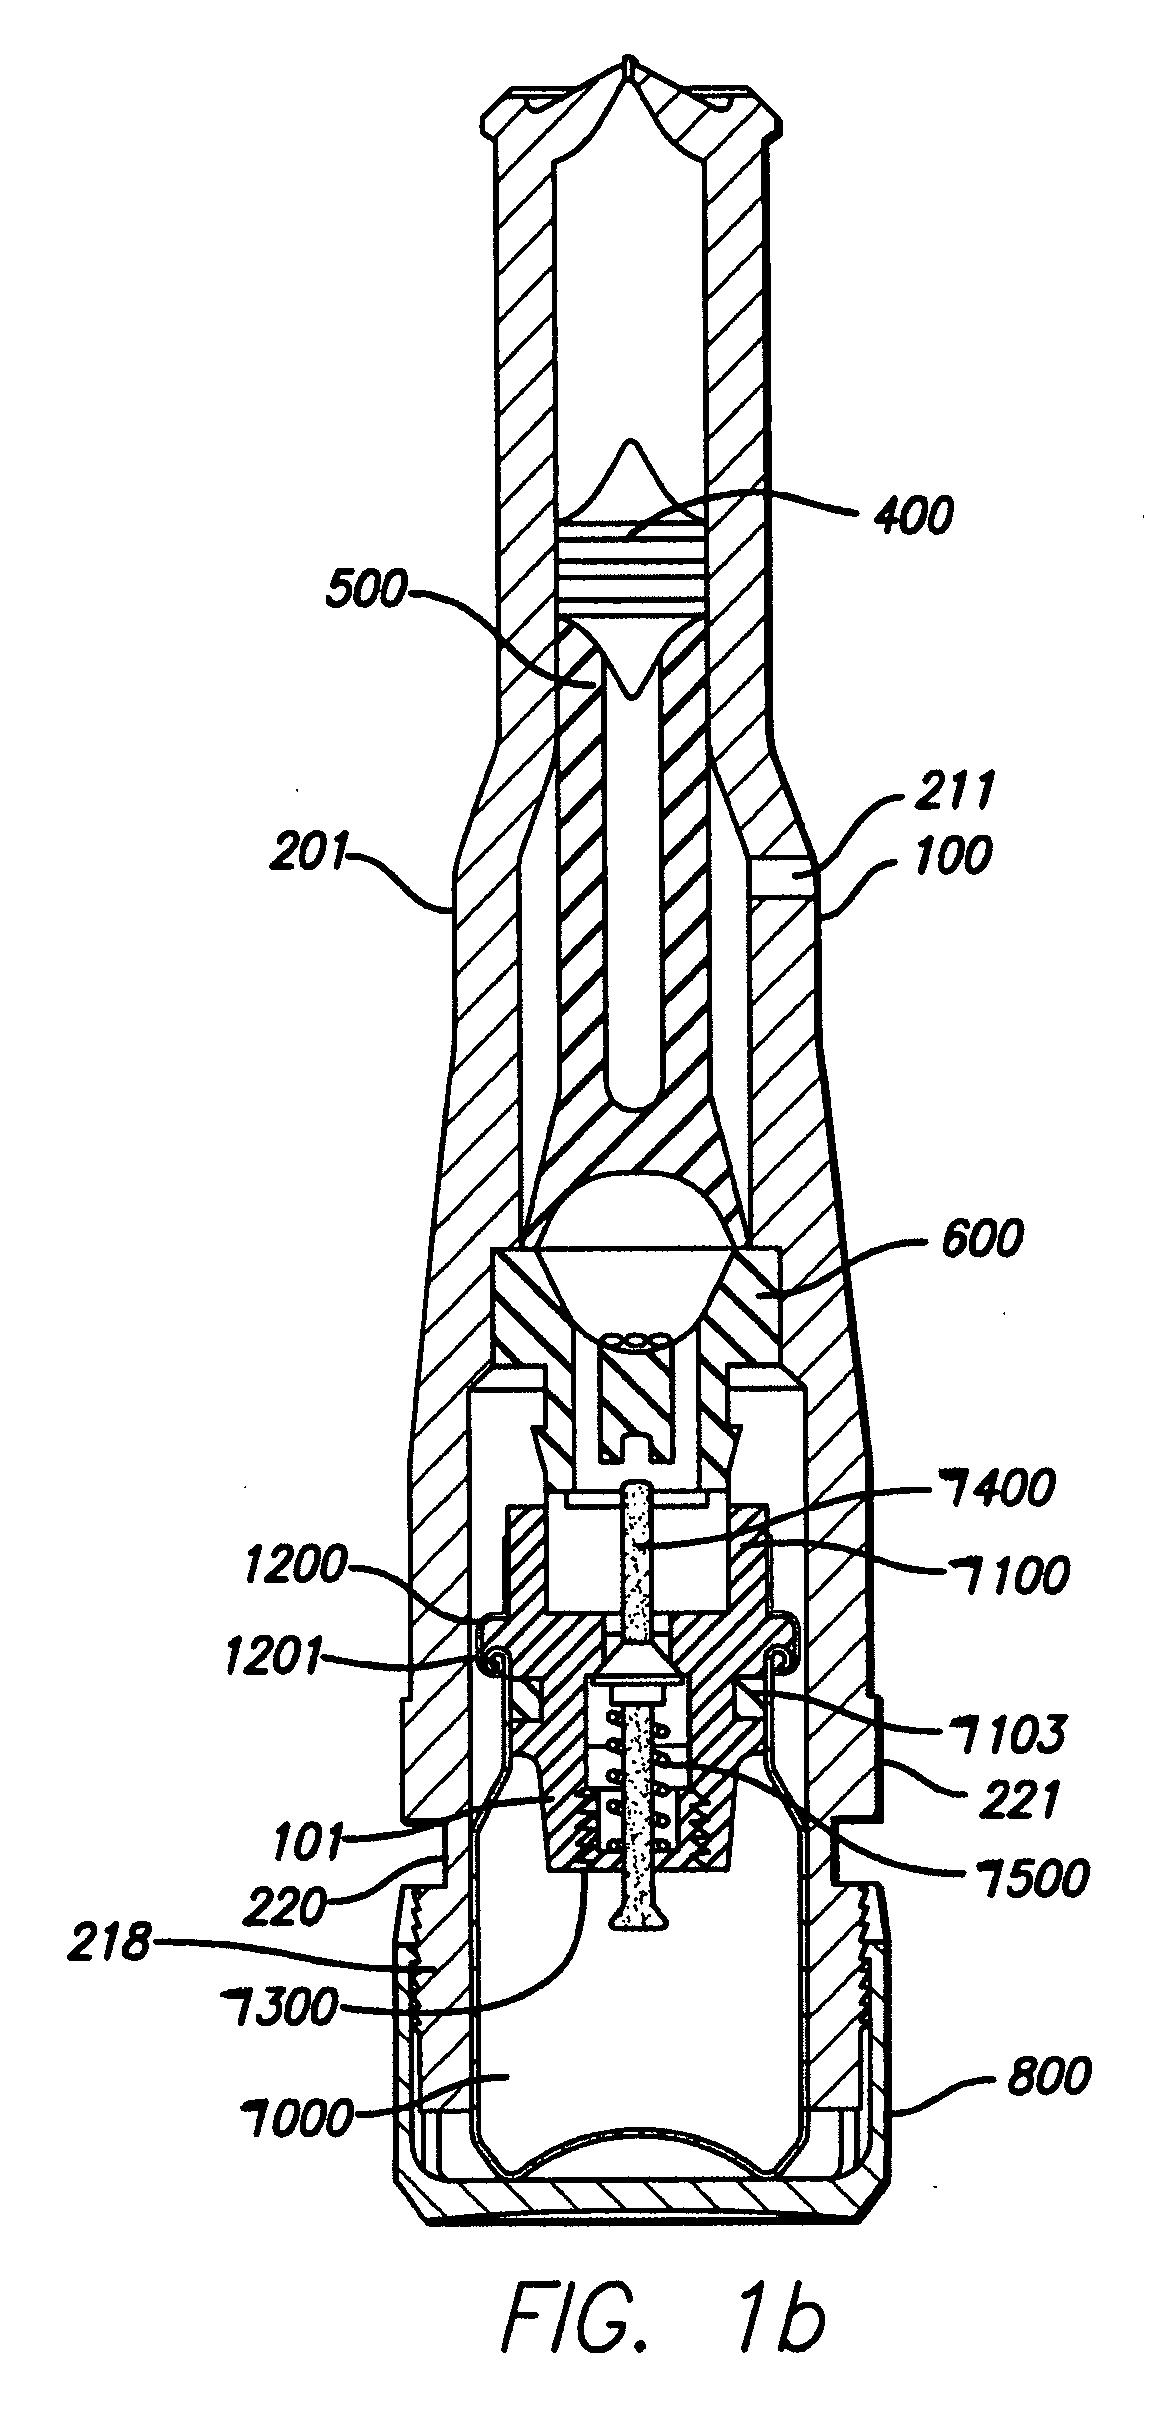 Method and apparatus for needle-less injection with a degassed fluid